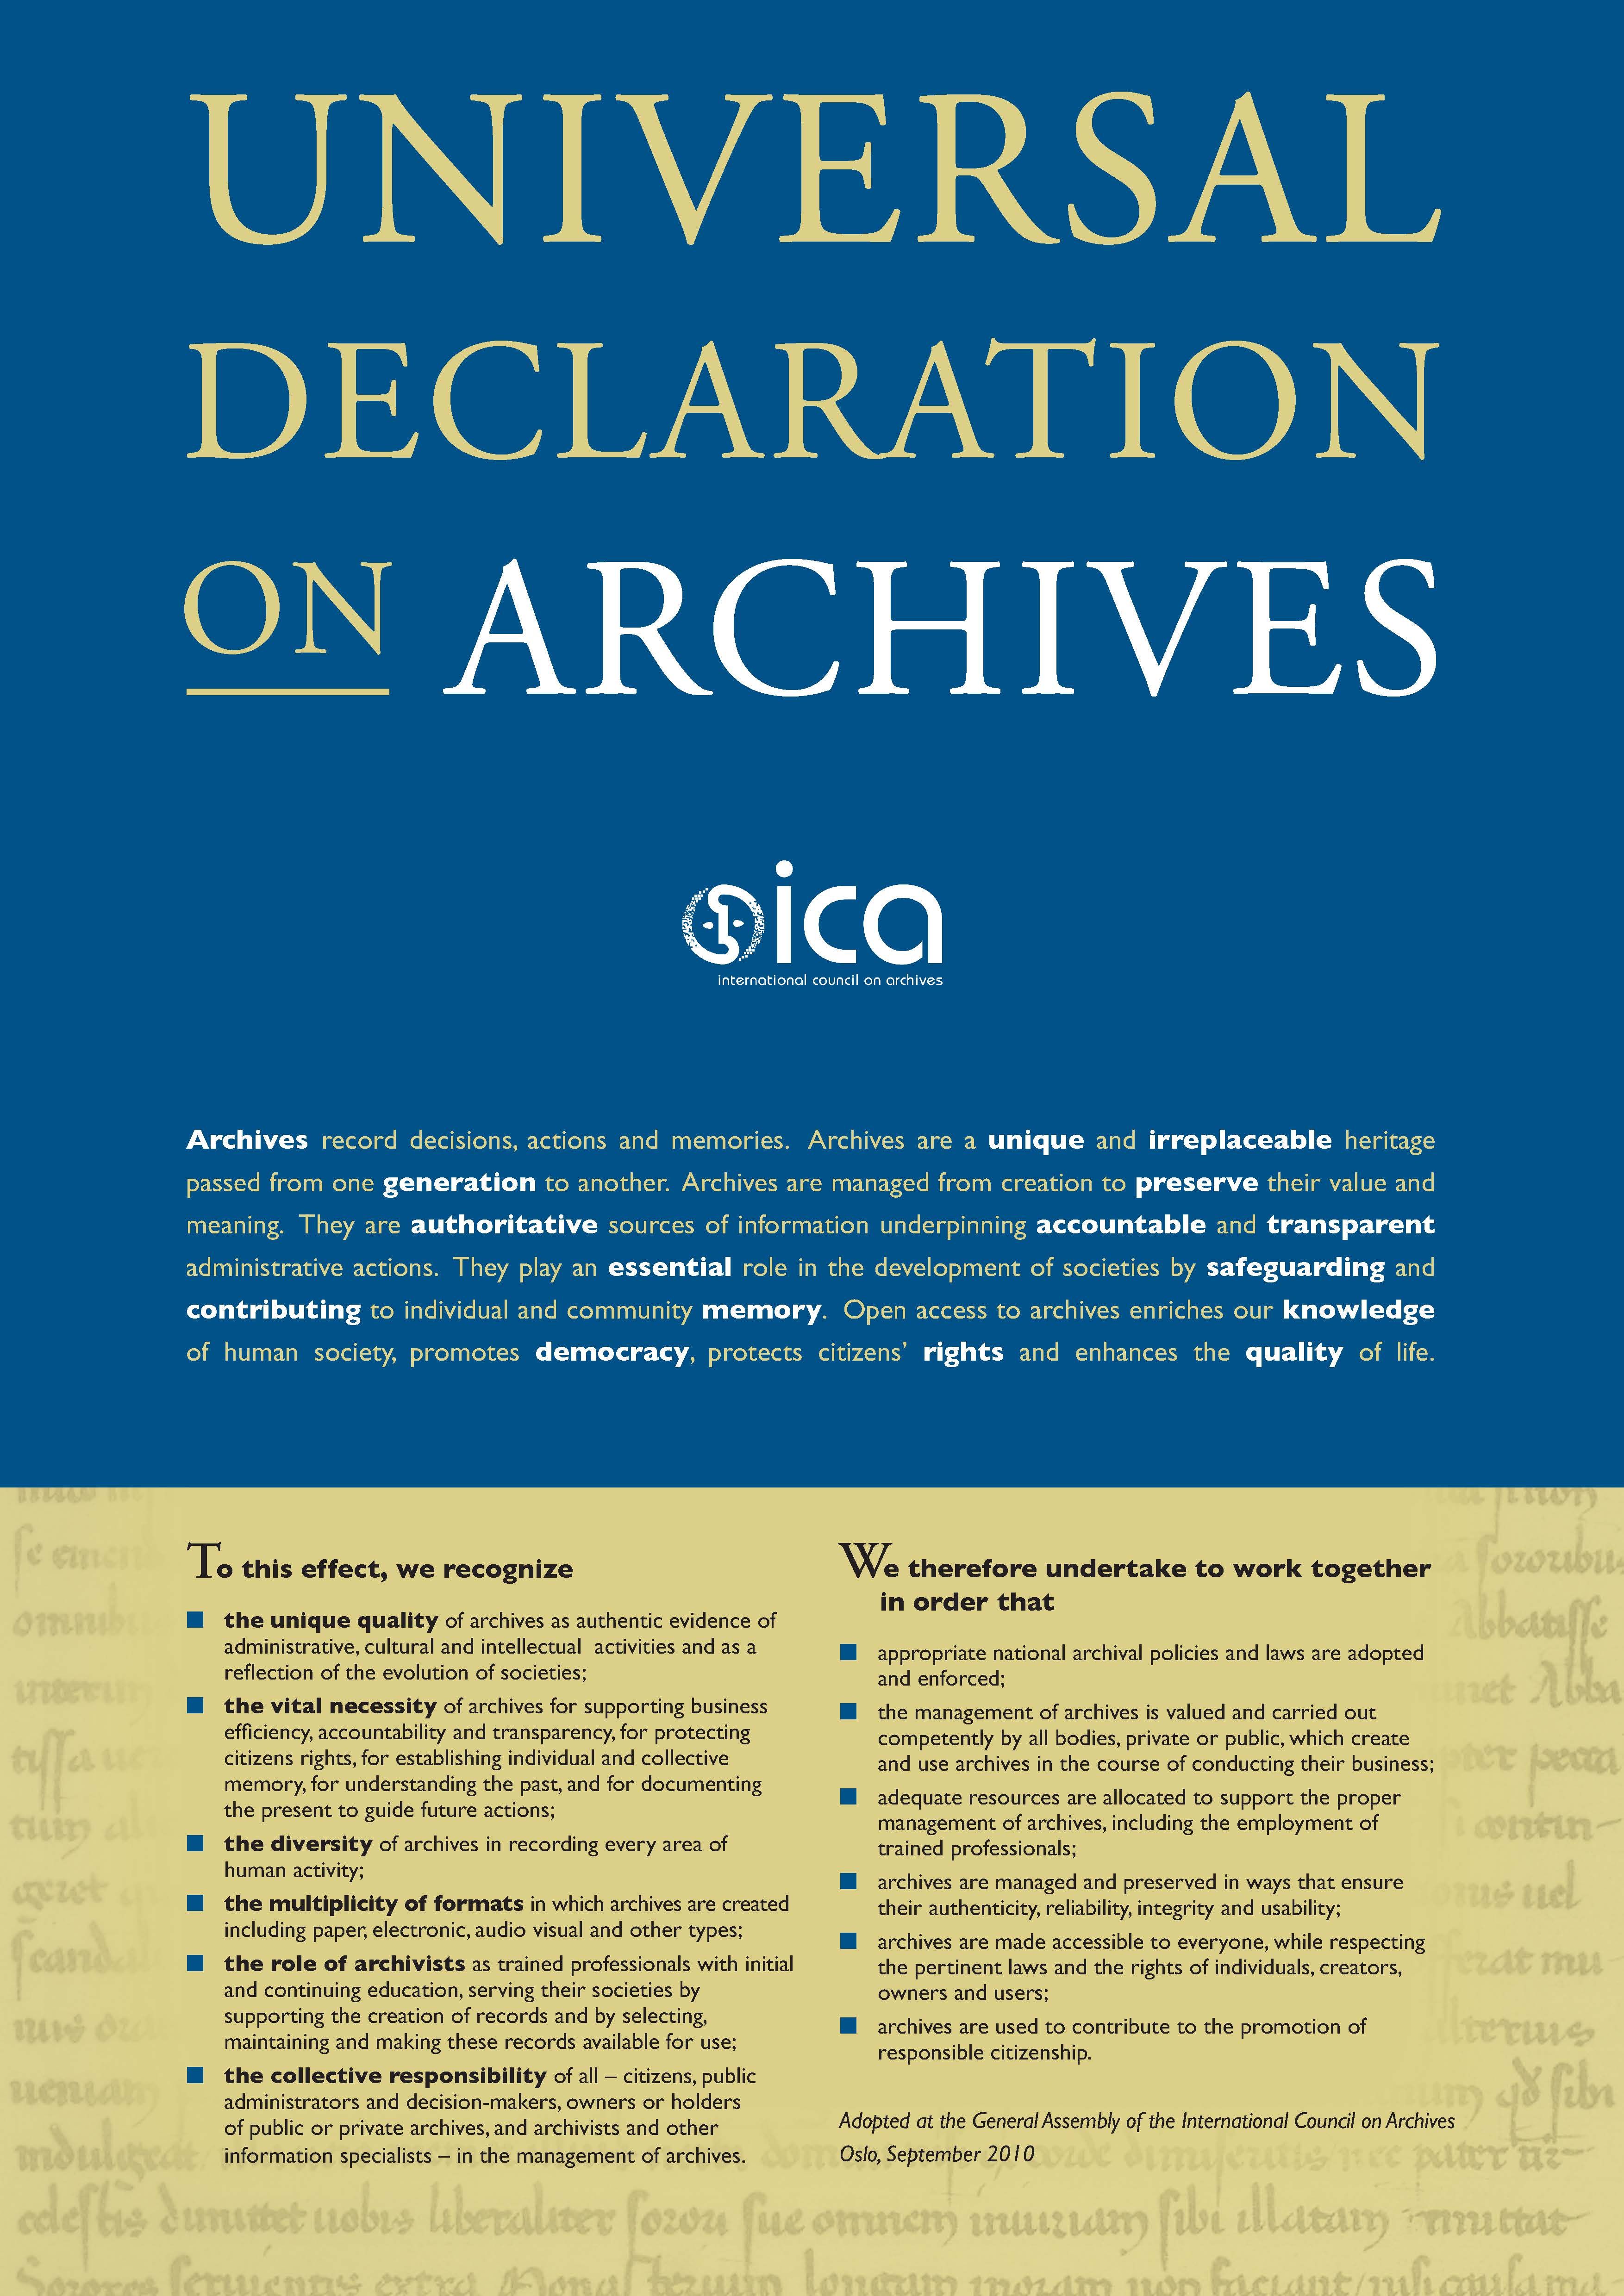 Poster featuring the Universial Declaration on Archives. Available at: http://www.ica.org/6573/reference-documents/universal-declaration-on-archives.html